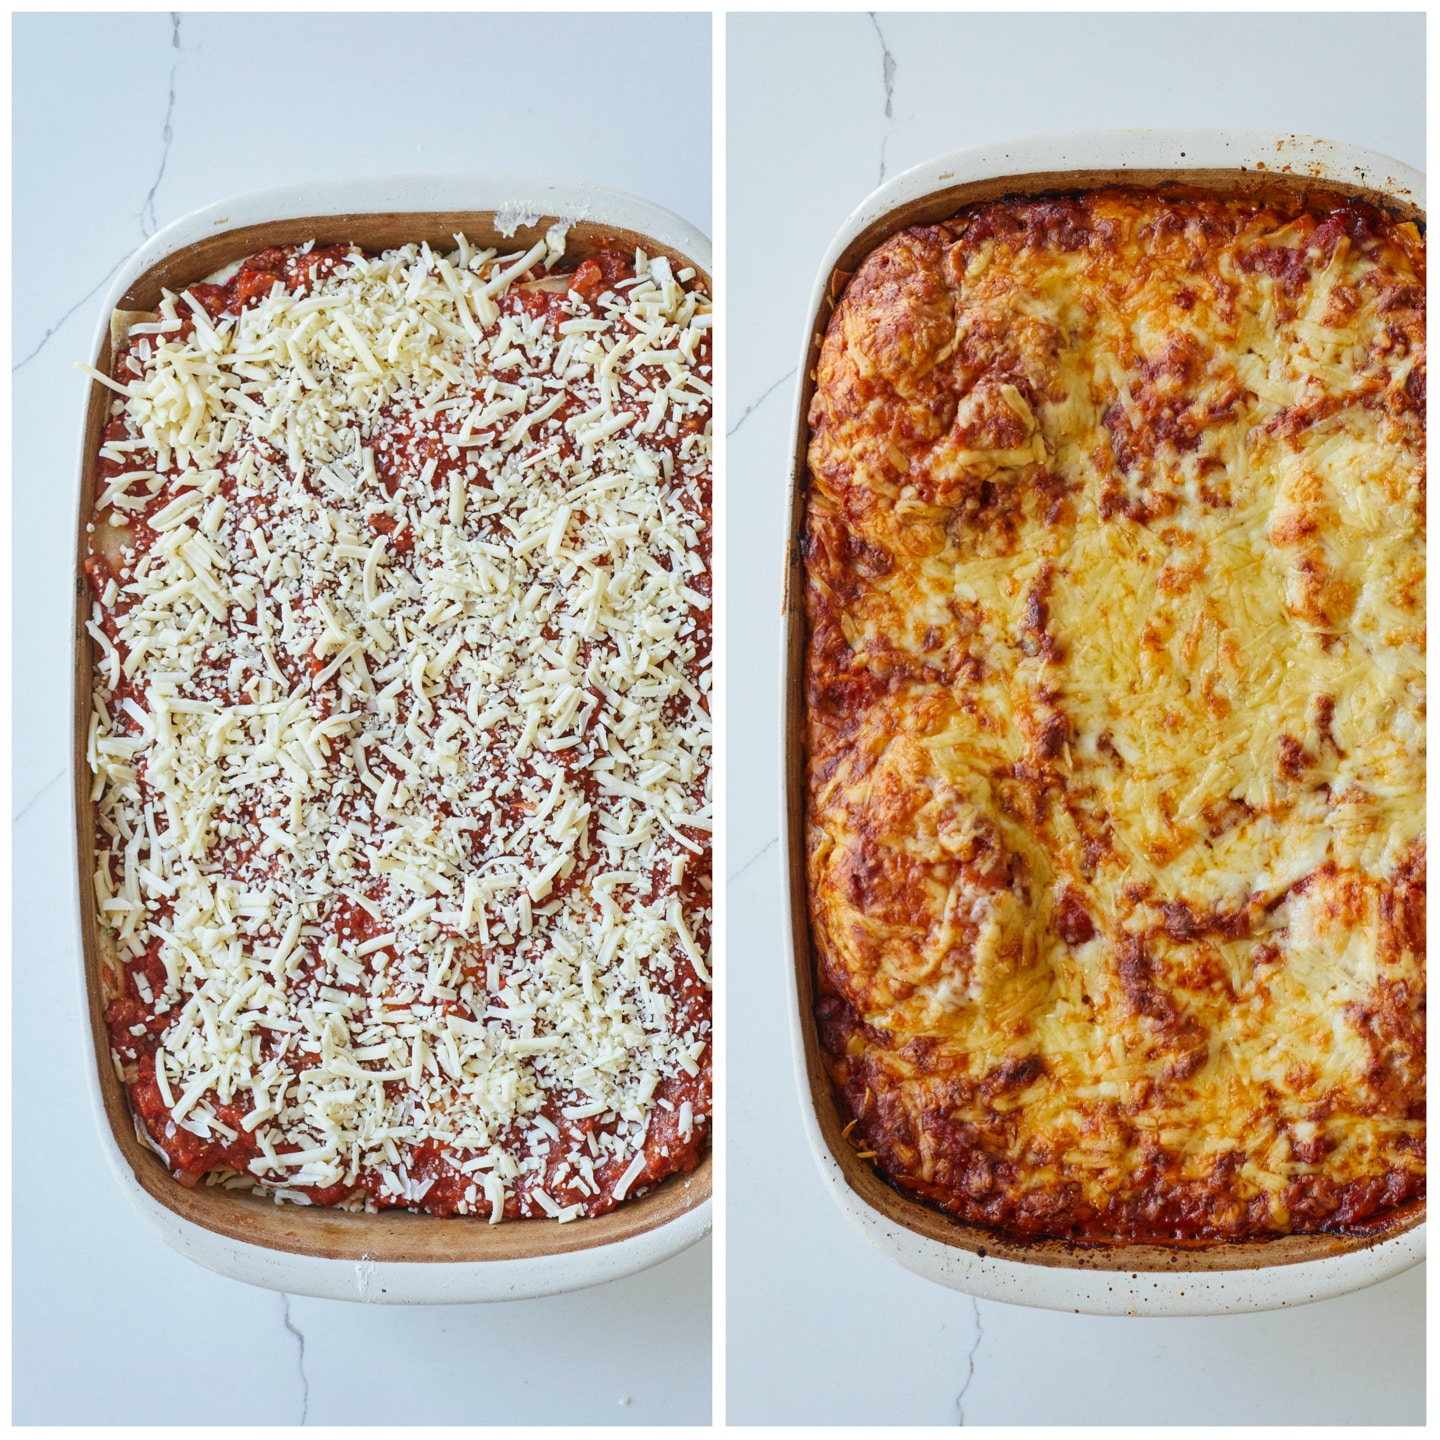 The Best Lasagna Recipe (100% From Scratch!) assembled Lasagna before and after baking